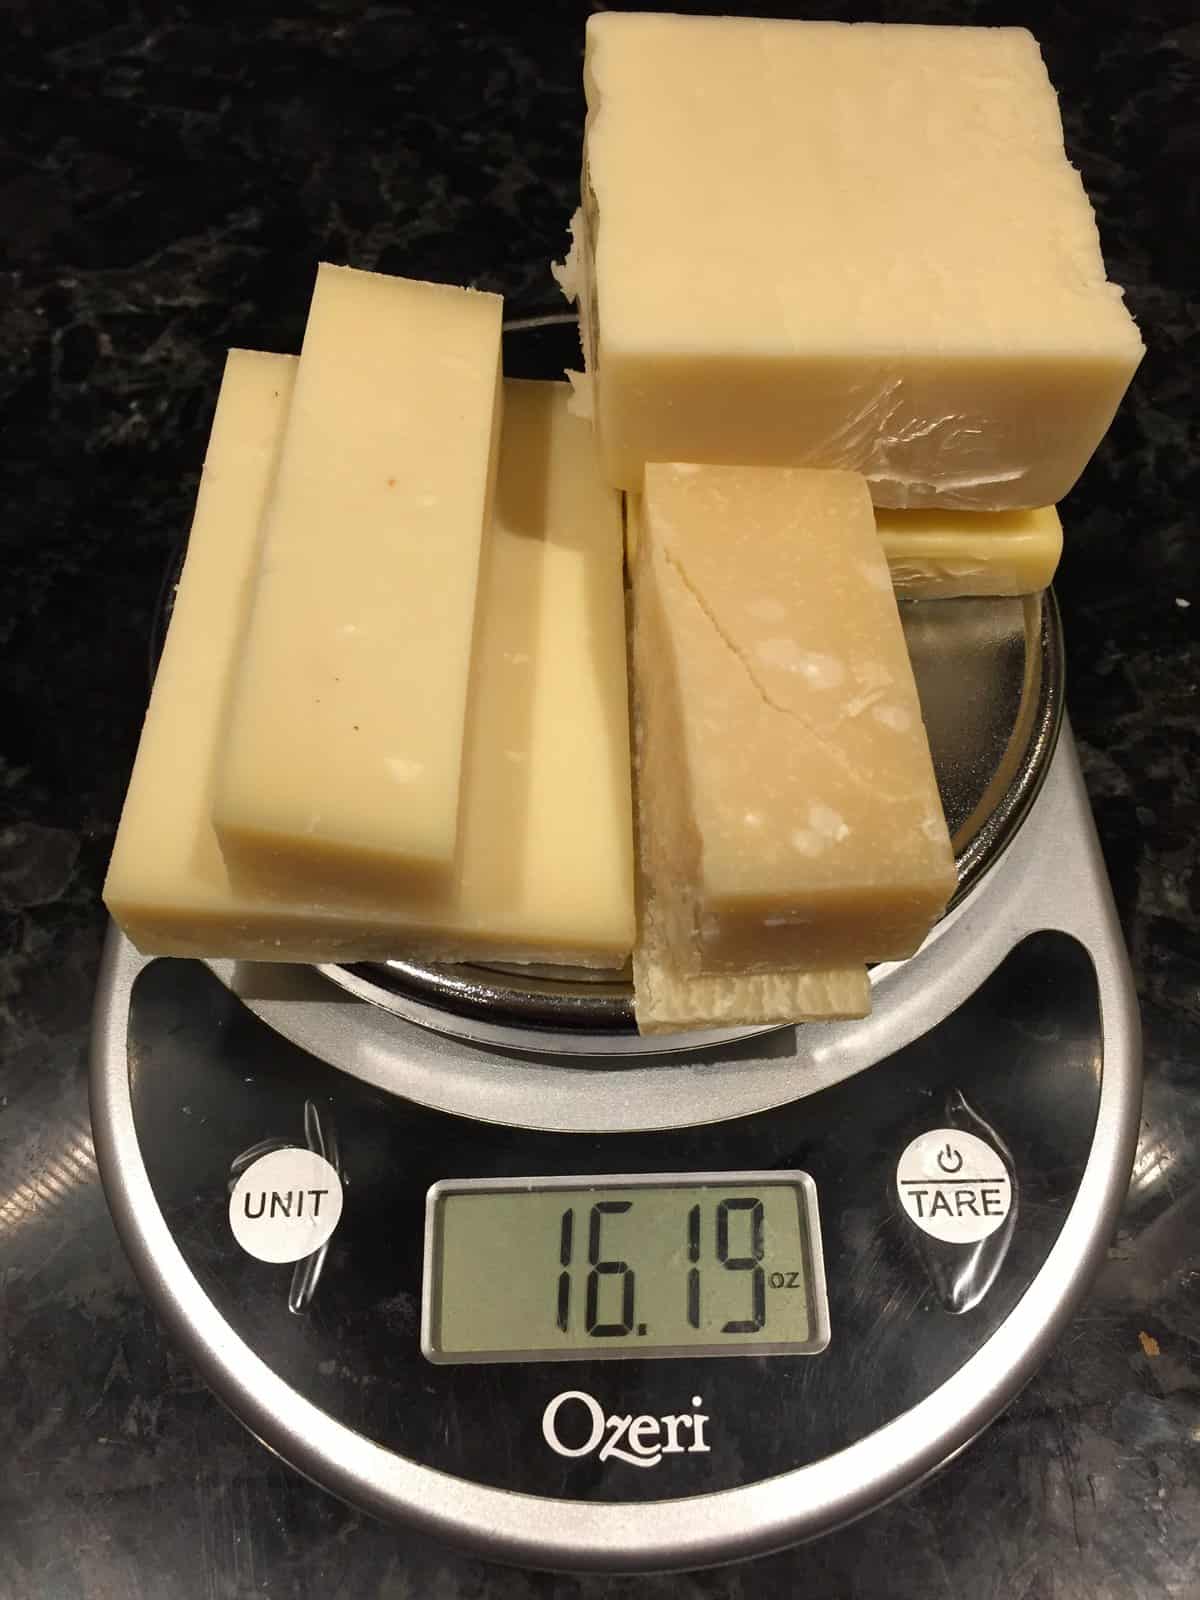 pound of cheese on a scale.